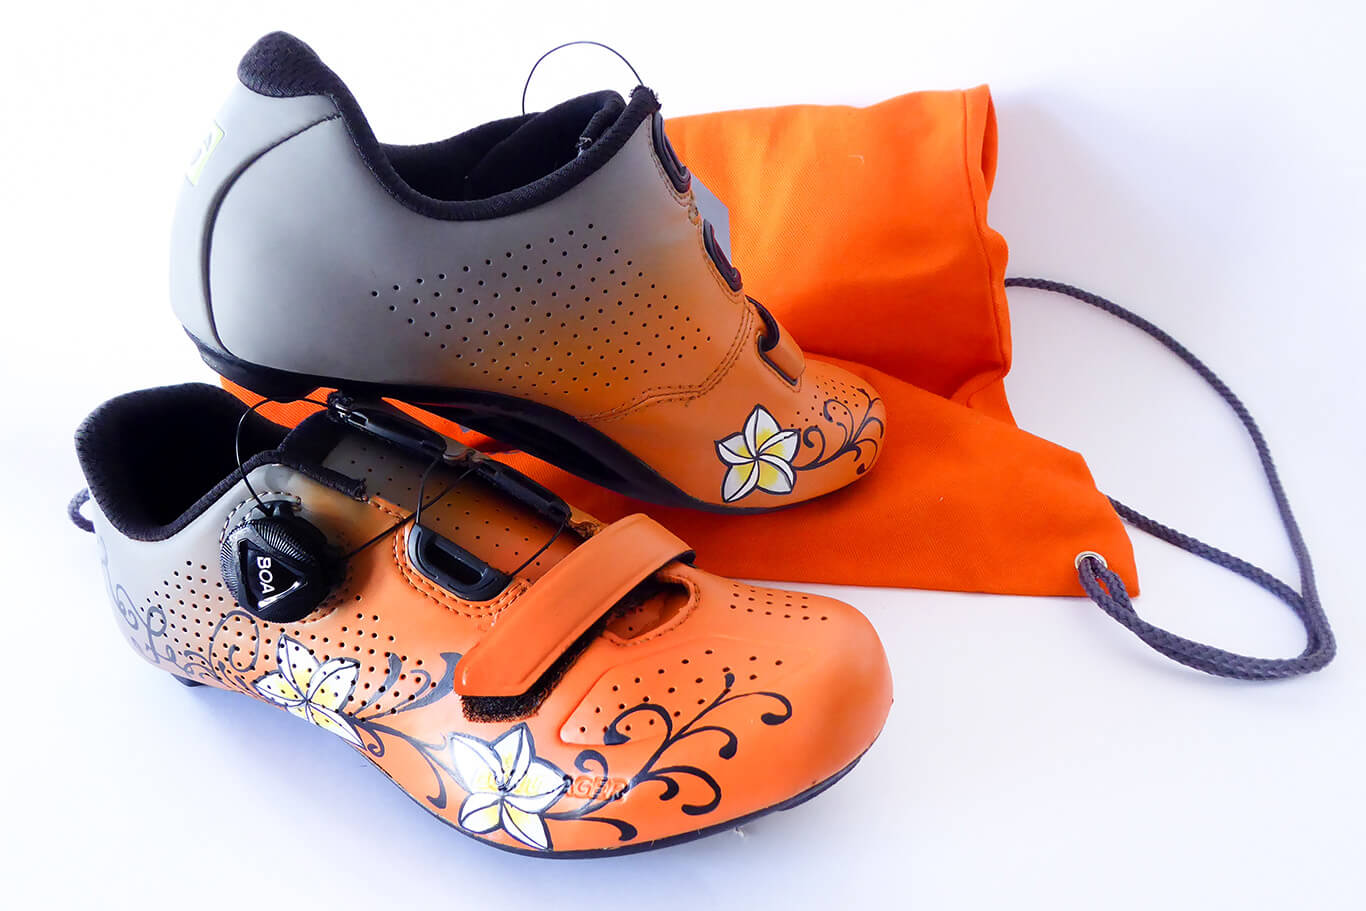 Bontrager Velocis Custom Design Hand Painted Cycling shoes by HC Bike Tours